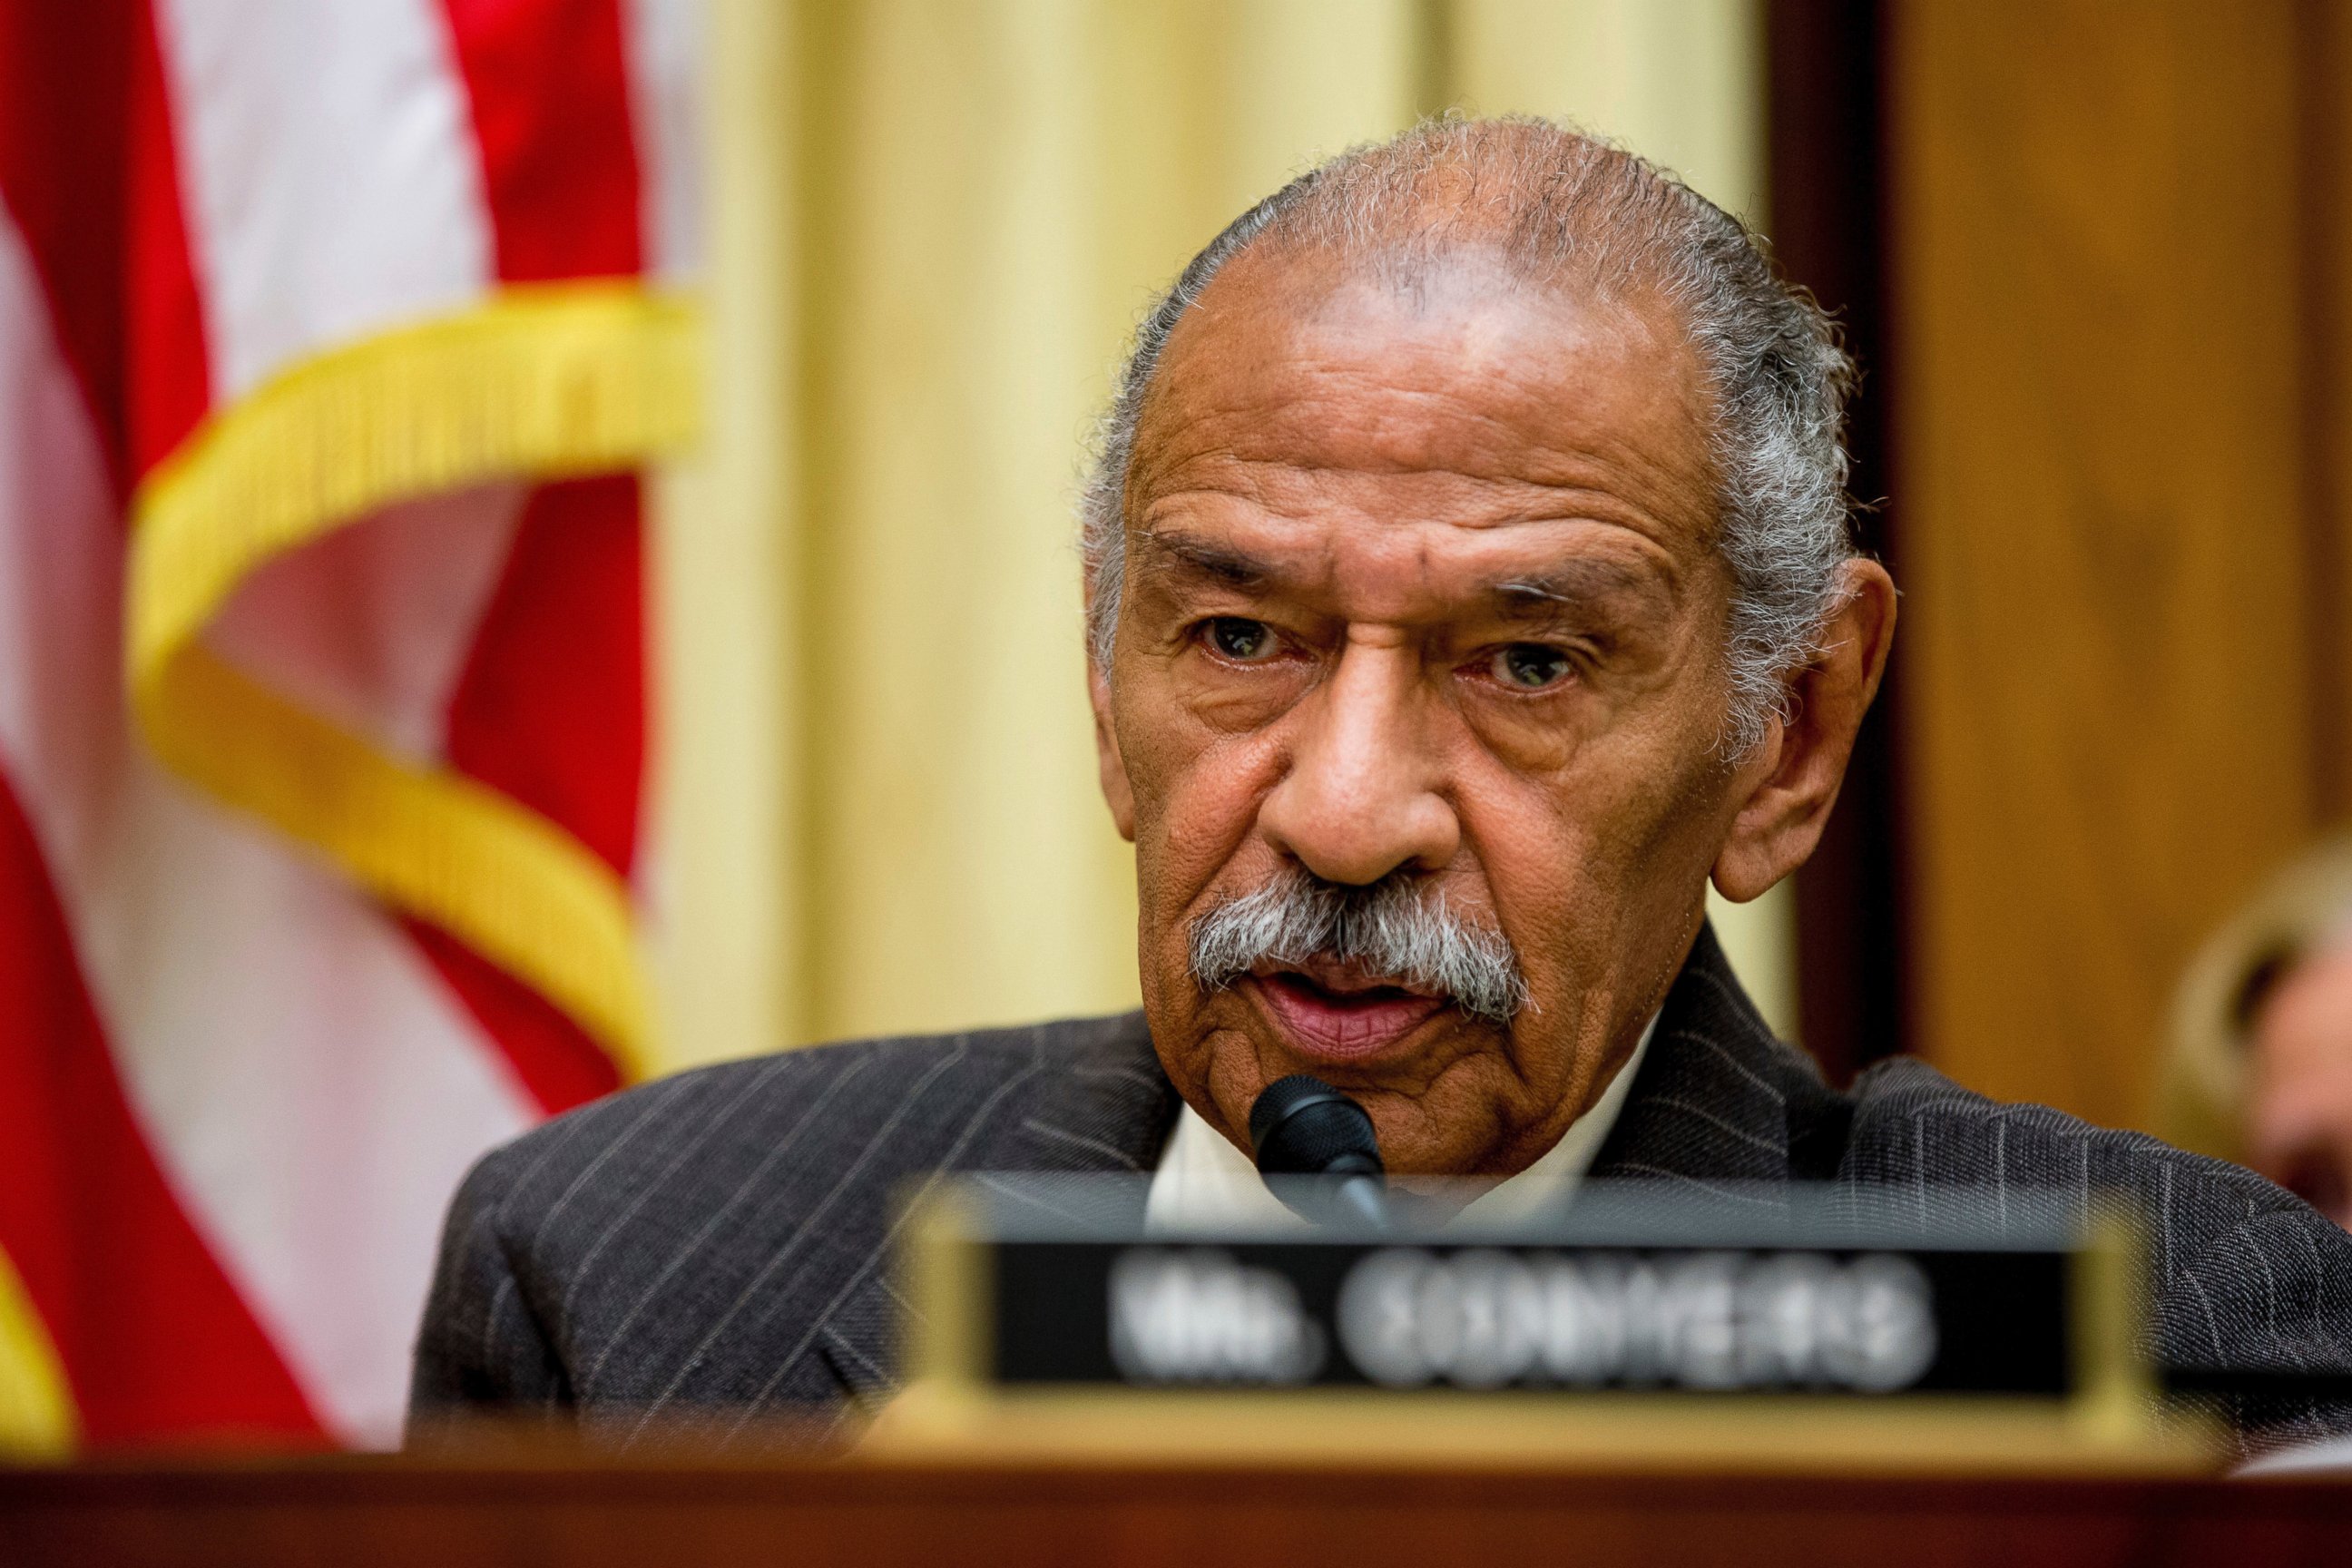 PHOTO:  In this May 24, 2016, file photo, Rep. John Conyers, D-Mich., ranking member on the House Judiciary Committee, speaks on Capitol Hill in Washington during a hearing.